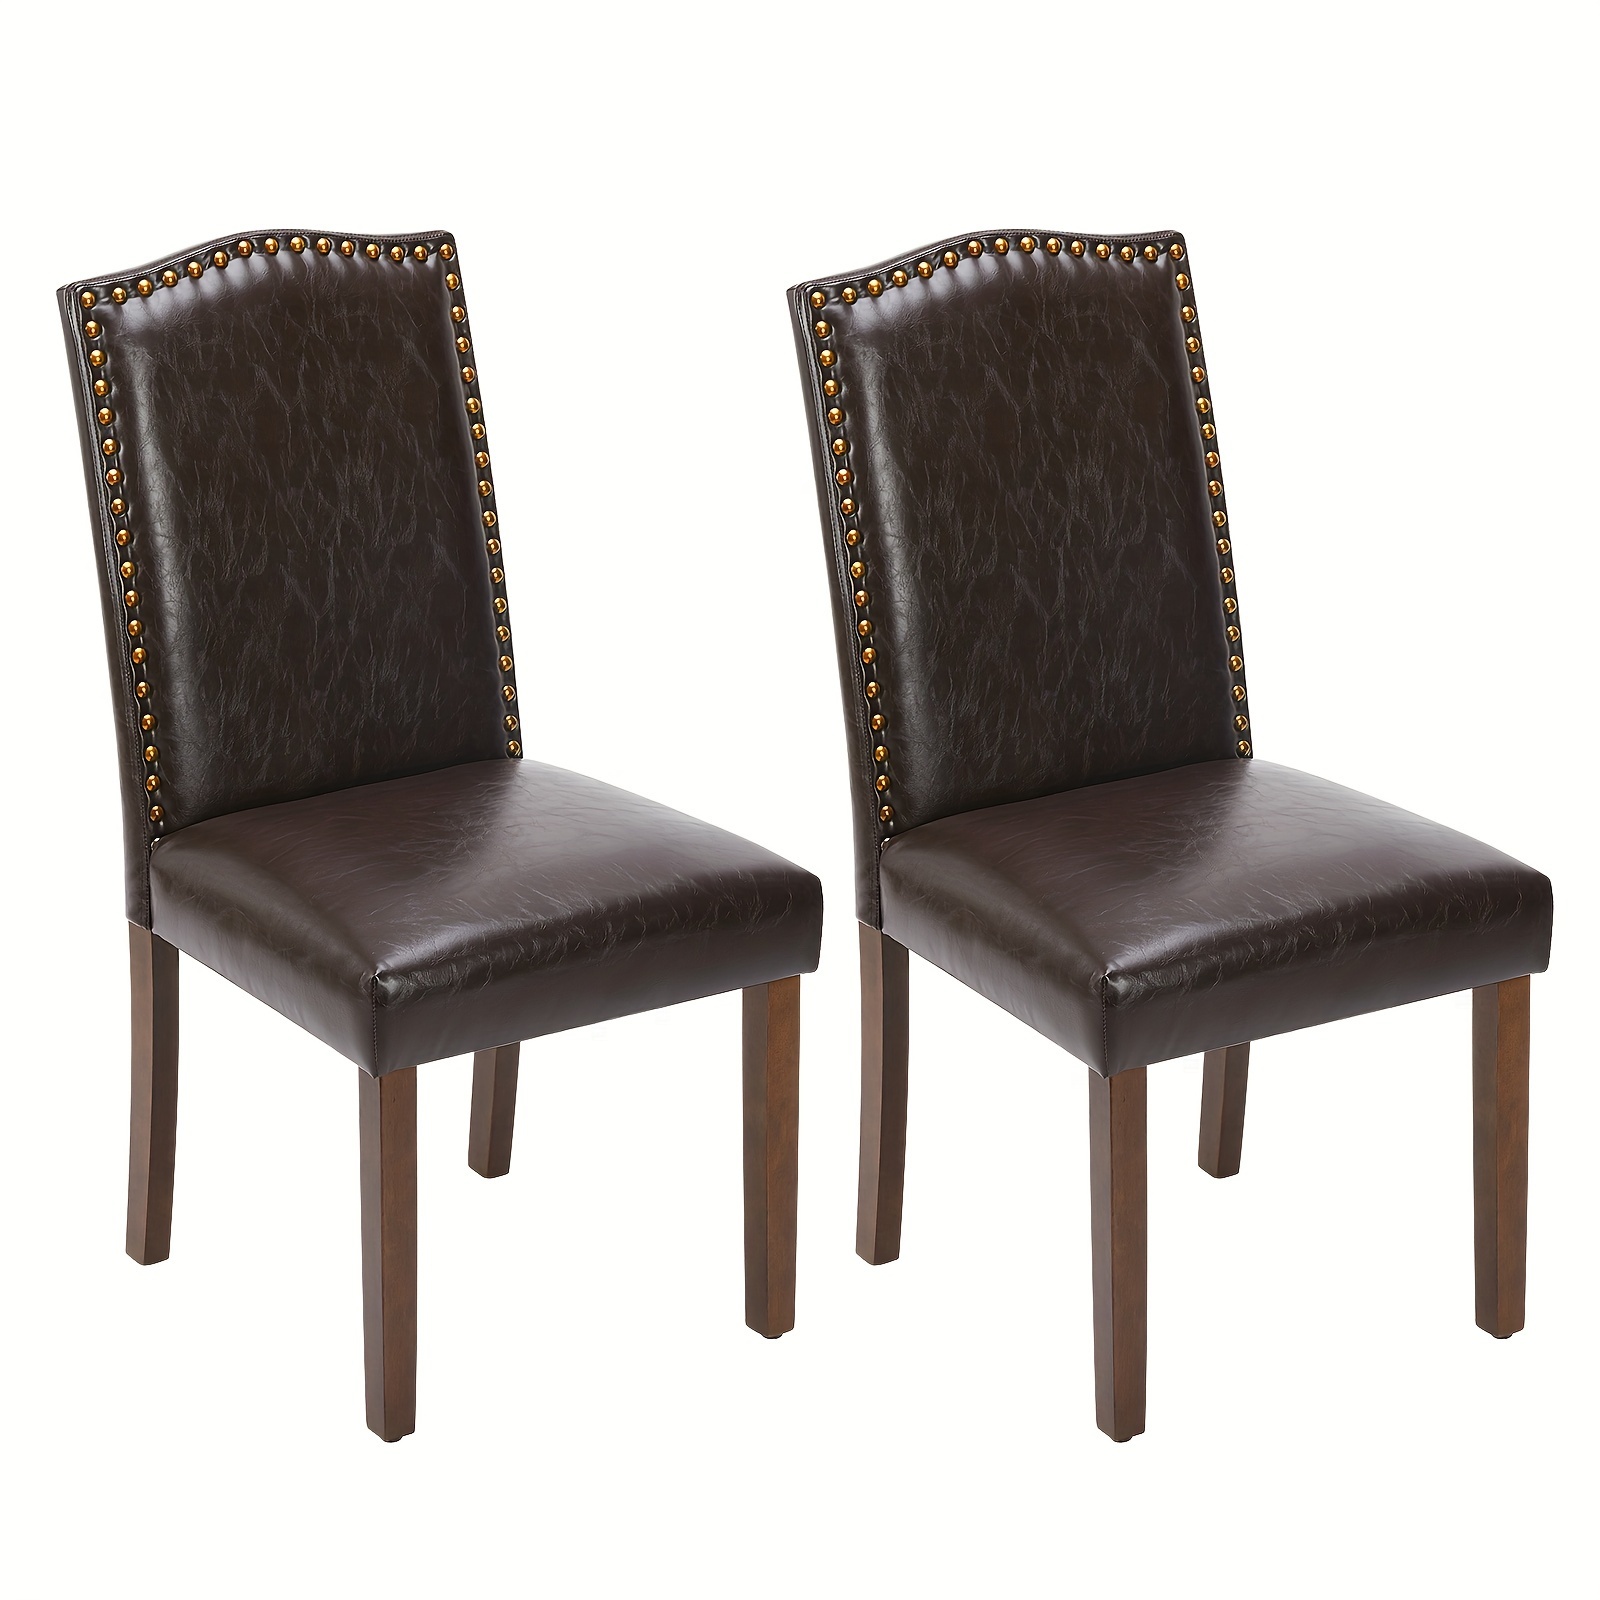 

Dining Chairs Set Of 2, Modern Upholstered Leather Dining Room Chair With Nailhead Trim And Wood Legs, Mid-century Accent Dinner Chair For Living Room, Kitchen